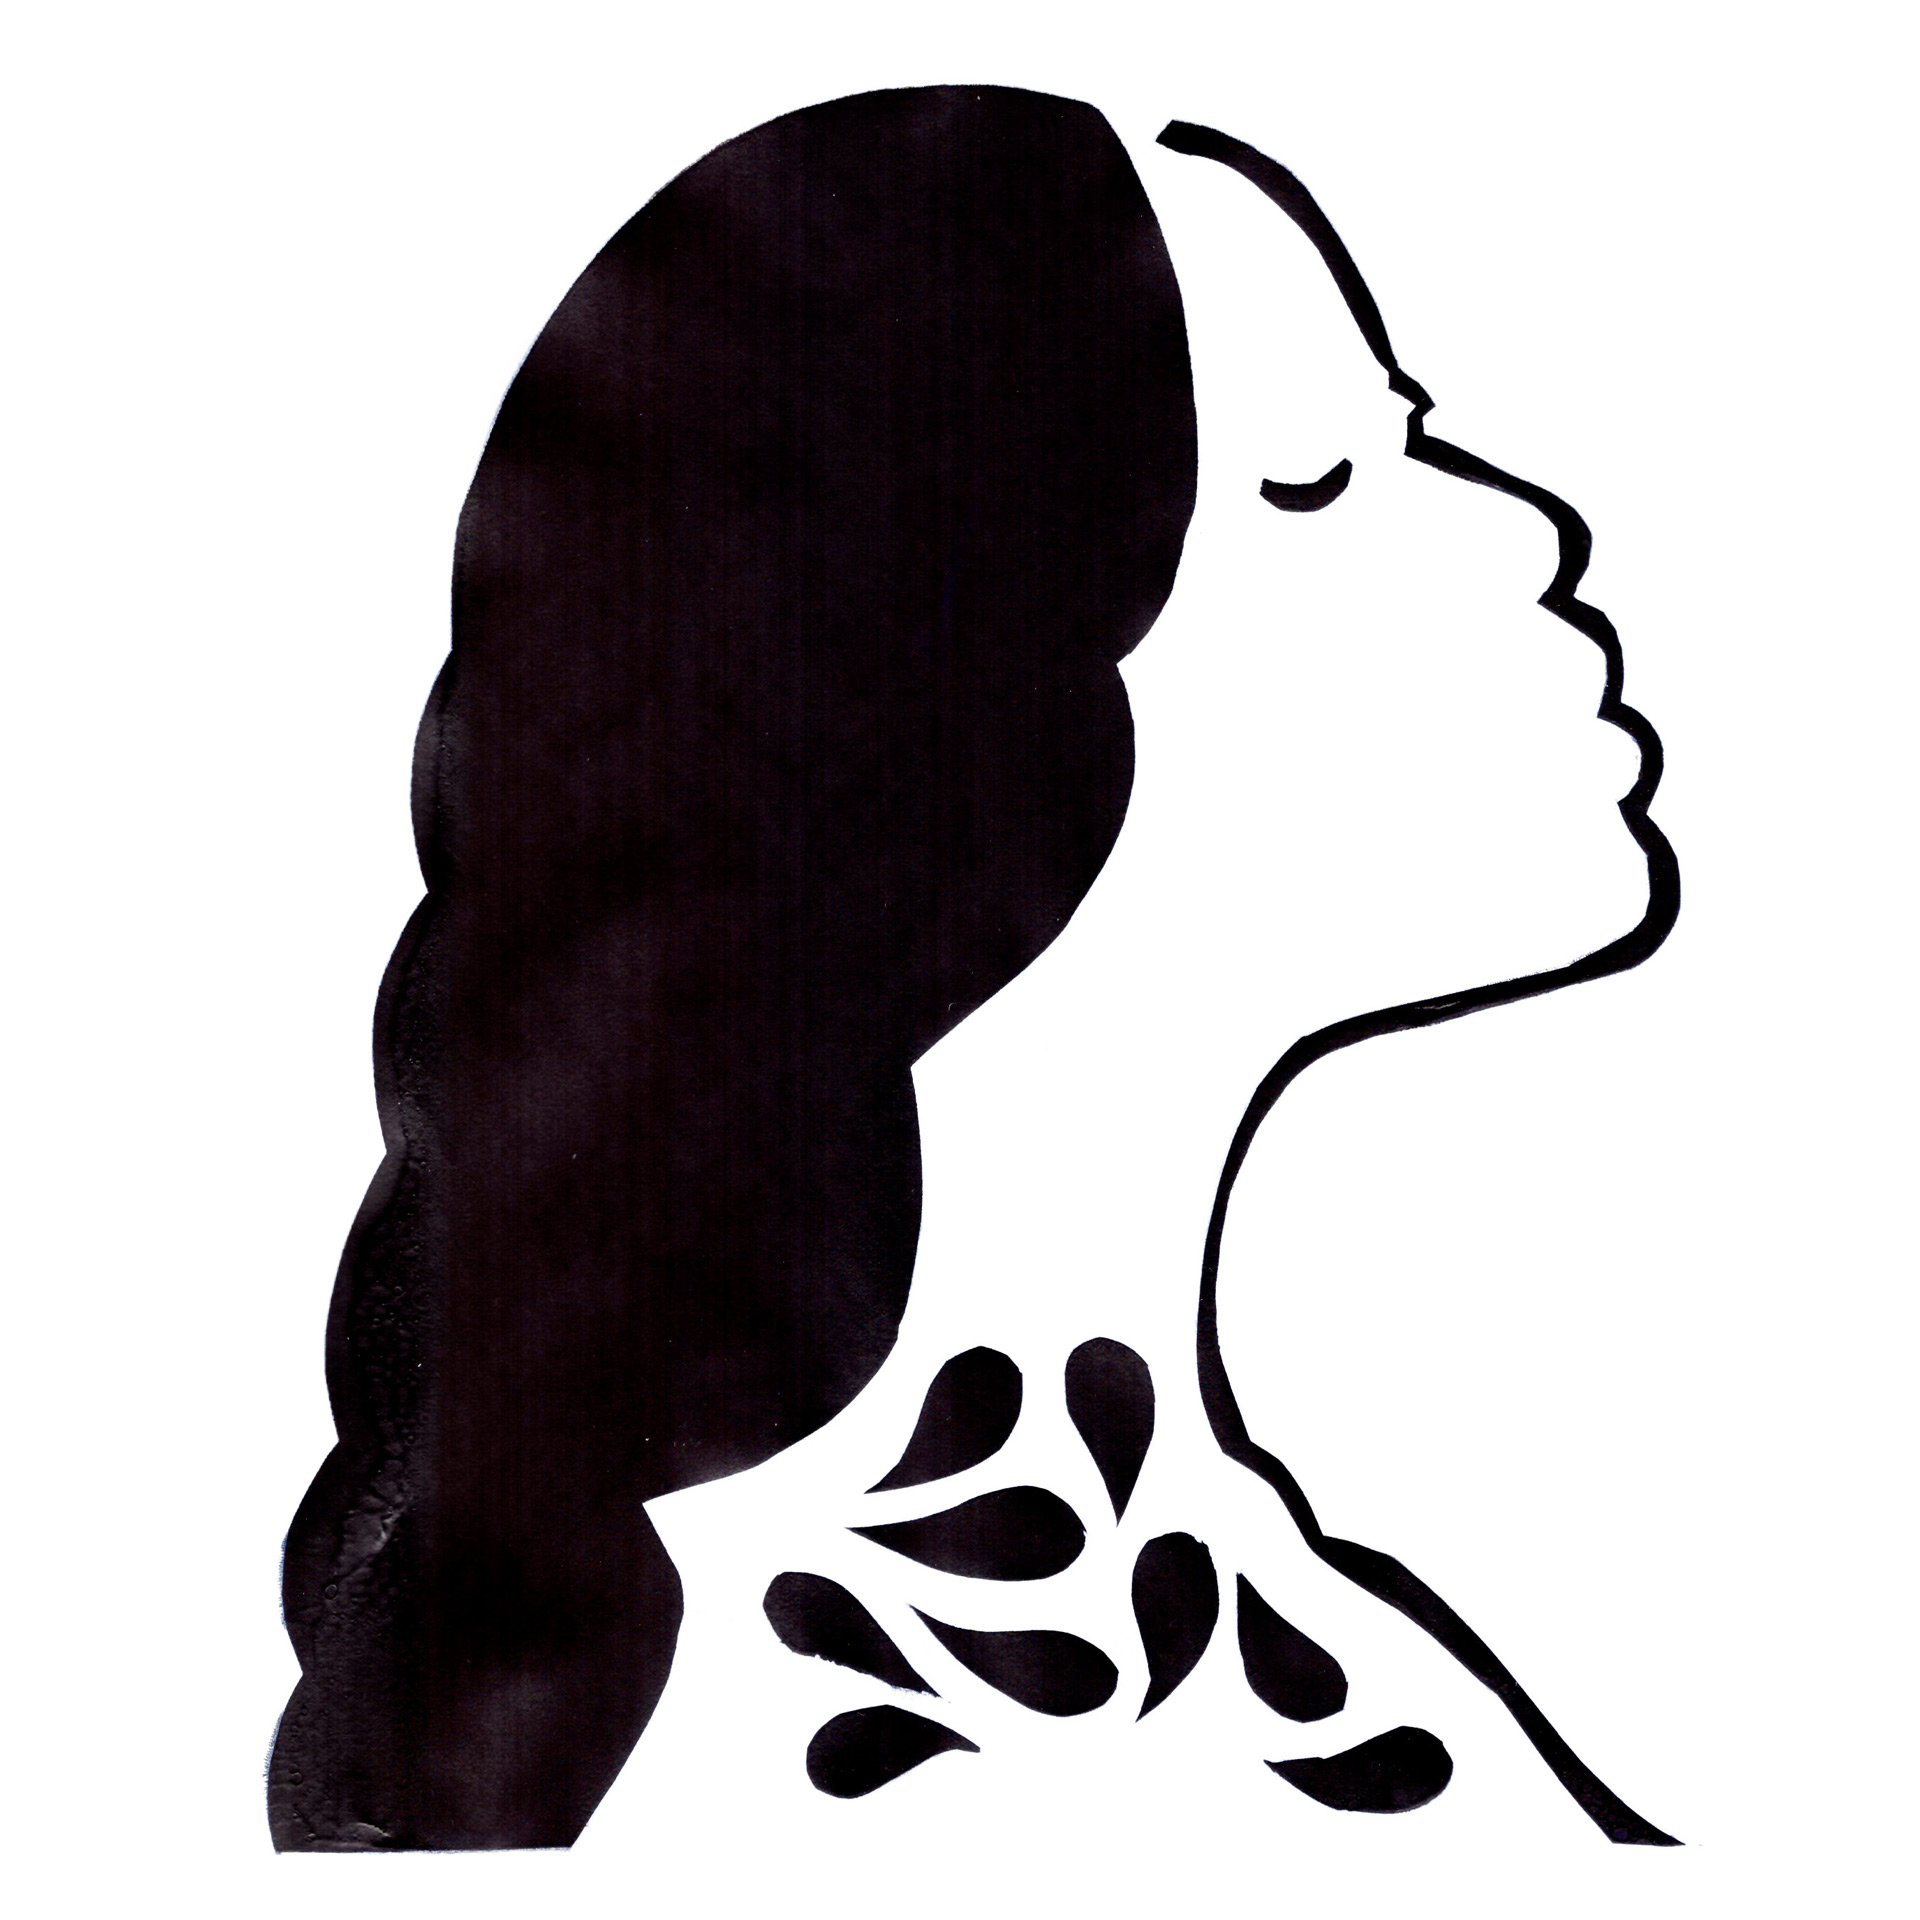 Screenprint of the side profile of a woman's face. It is in an outlined style, with bold lines and contrasting tones. Black ink makes up the features of the hair, eye and nose. There is a teardrops pattern on the woman's neckline. The print is on white paper. 